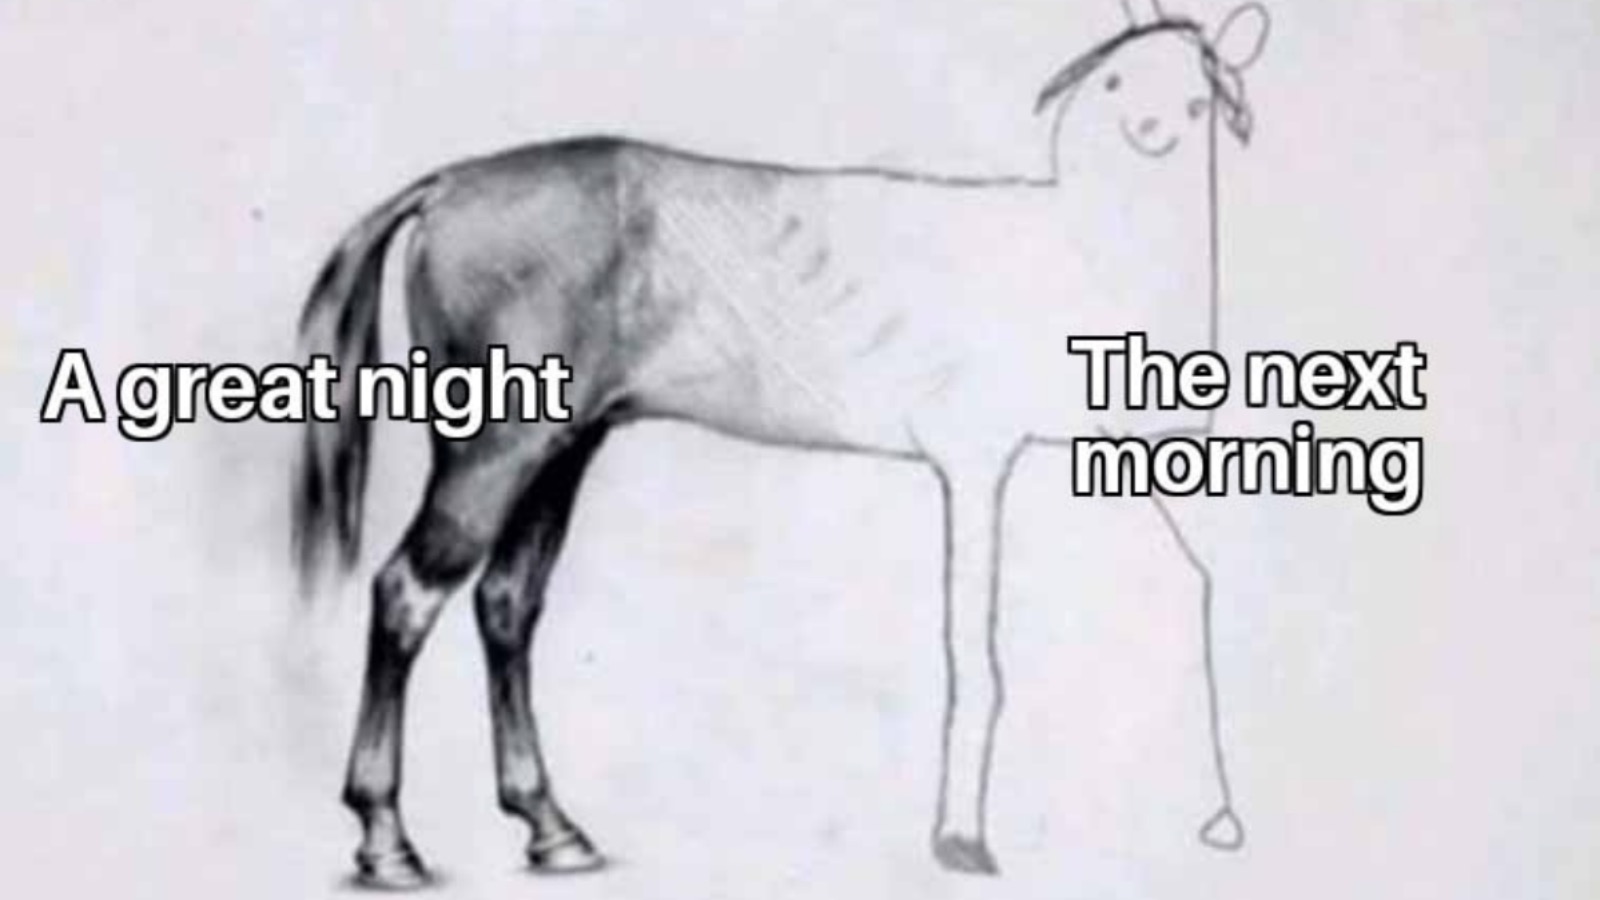 funniest meme about night vs morning